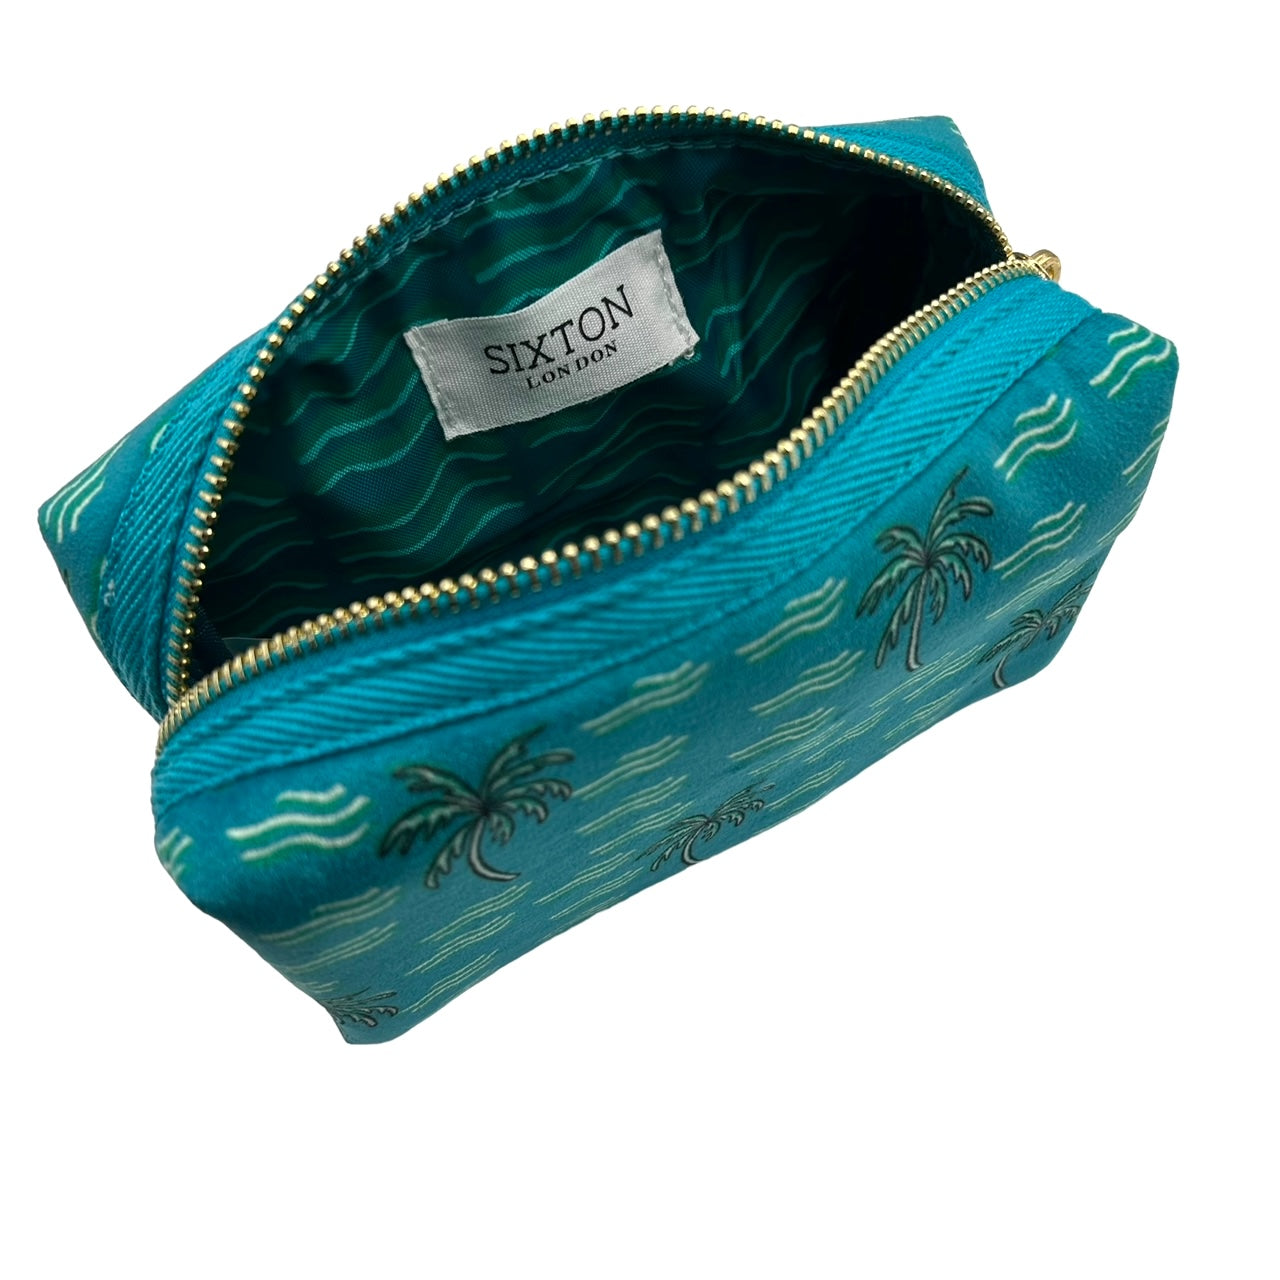 Teal palm large make-up bag & a pineapple brooch - recycled velvet, large and small